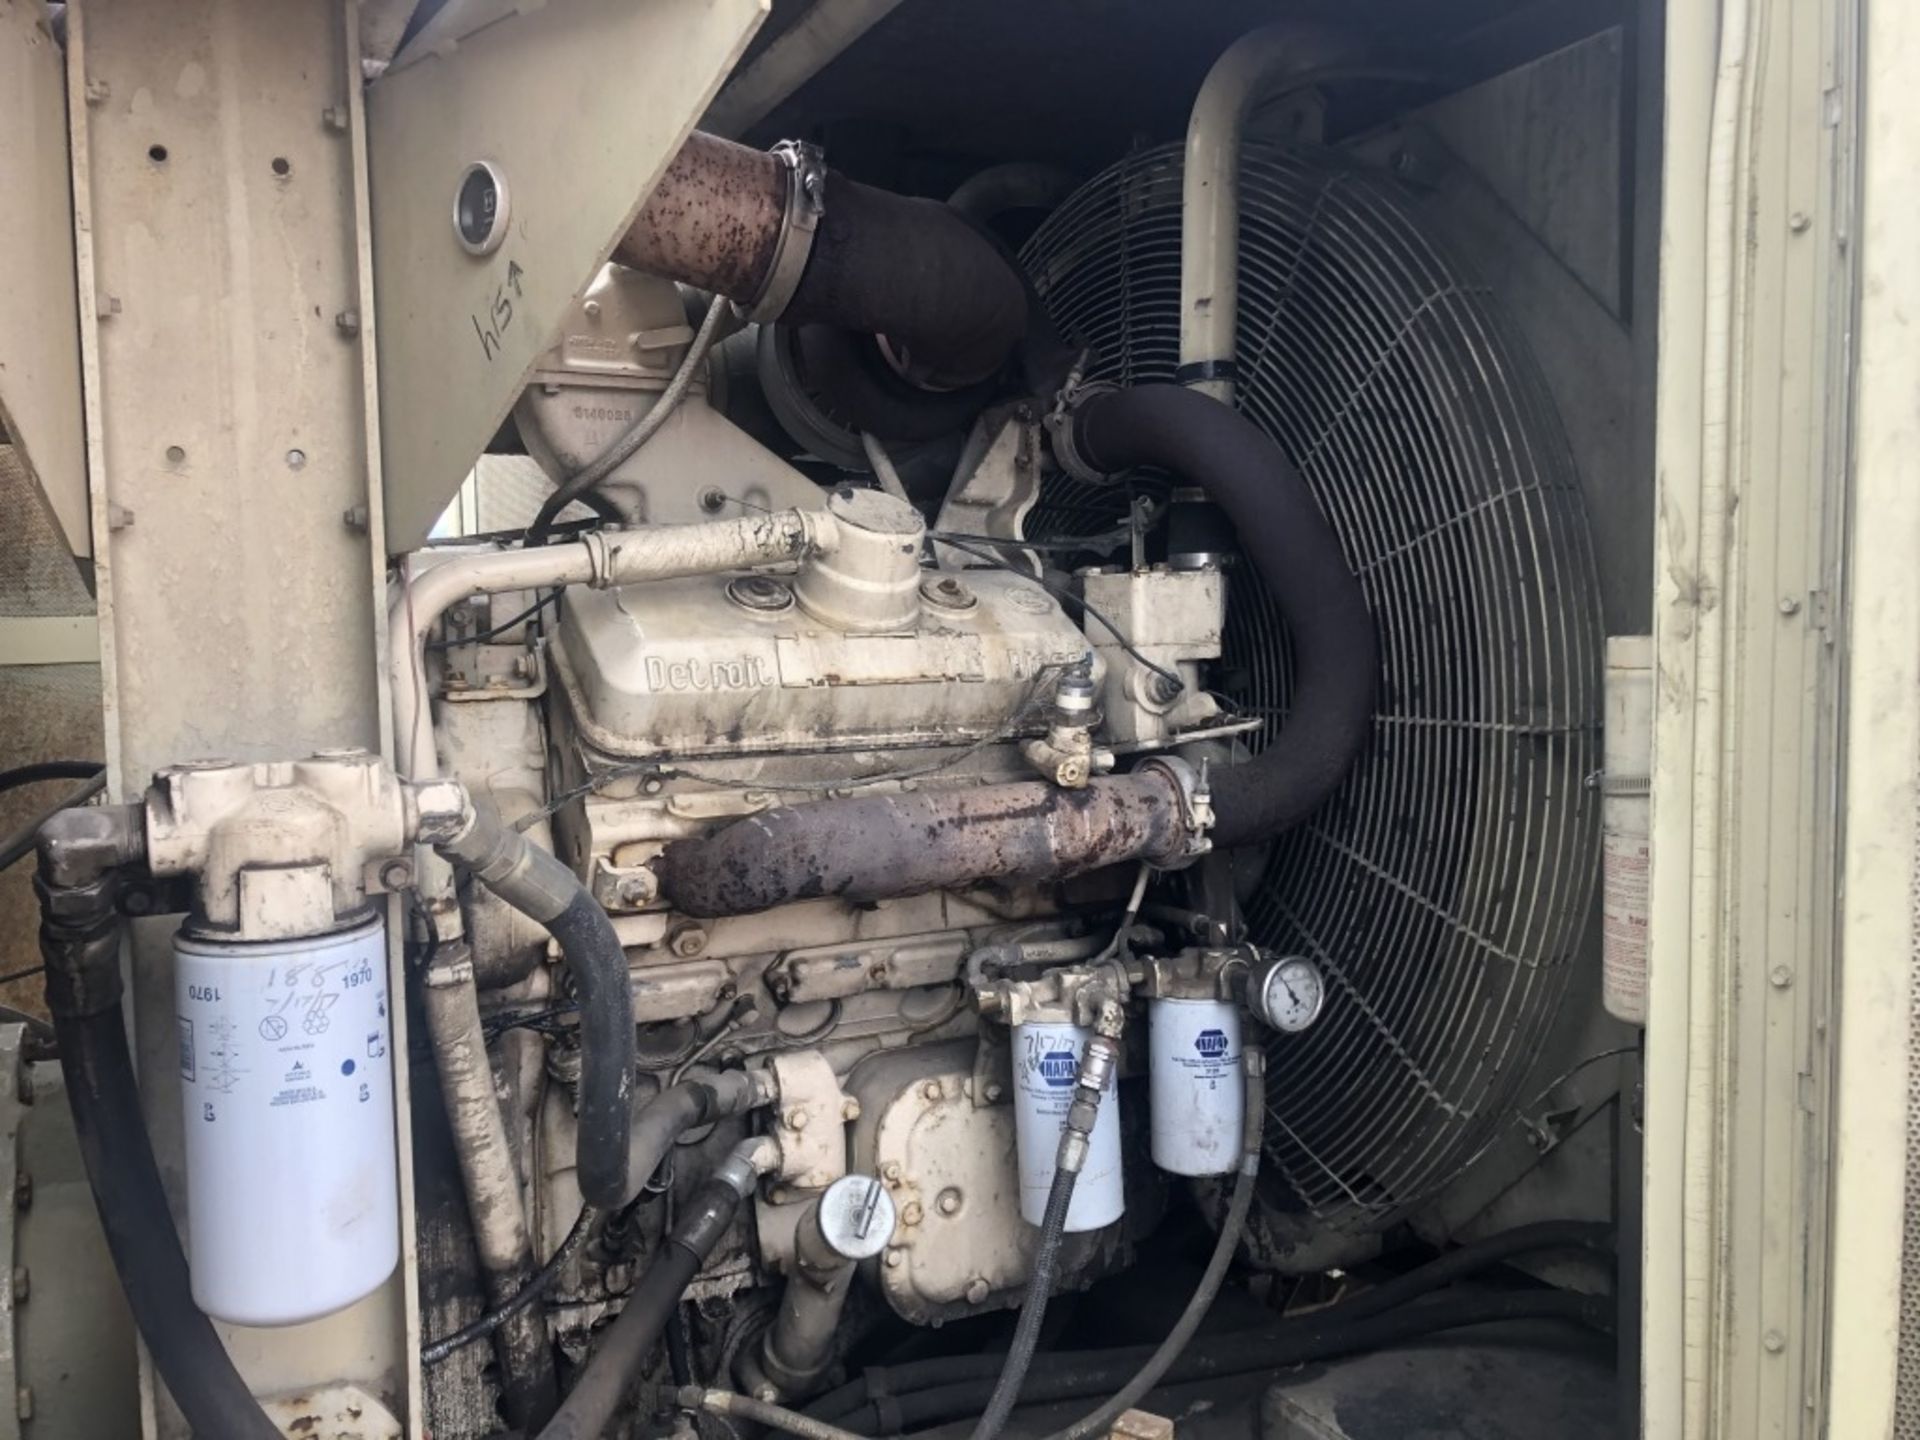 1981 Ingersoll Rand 750 Towable Air Compressor - Image 21 of 26